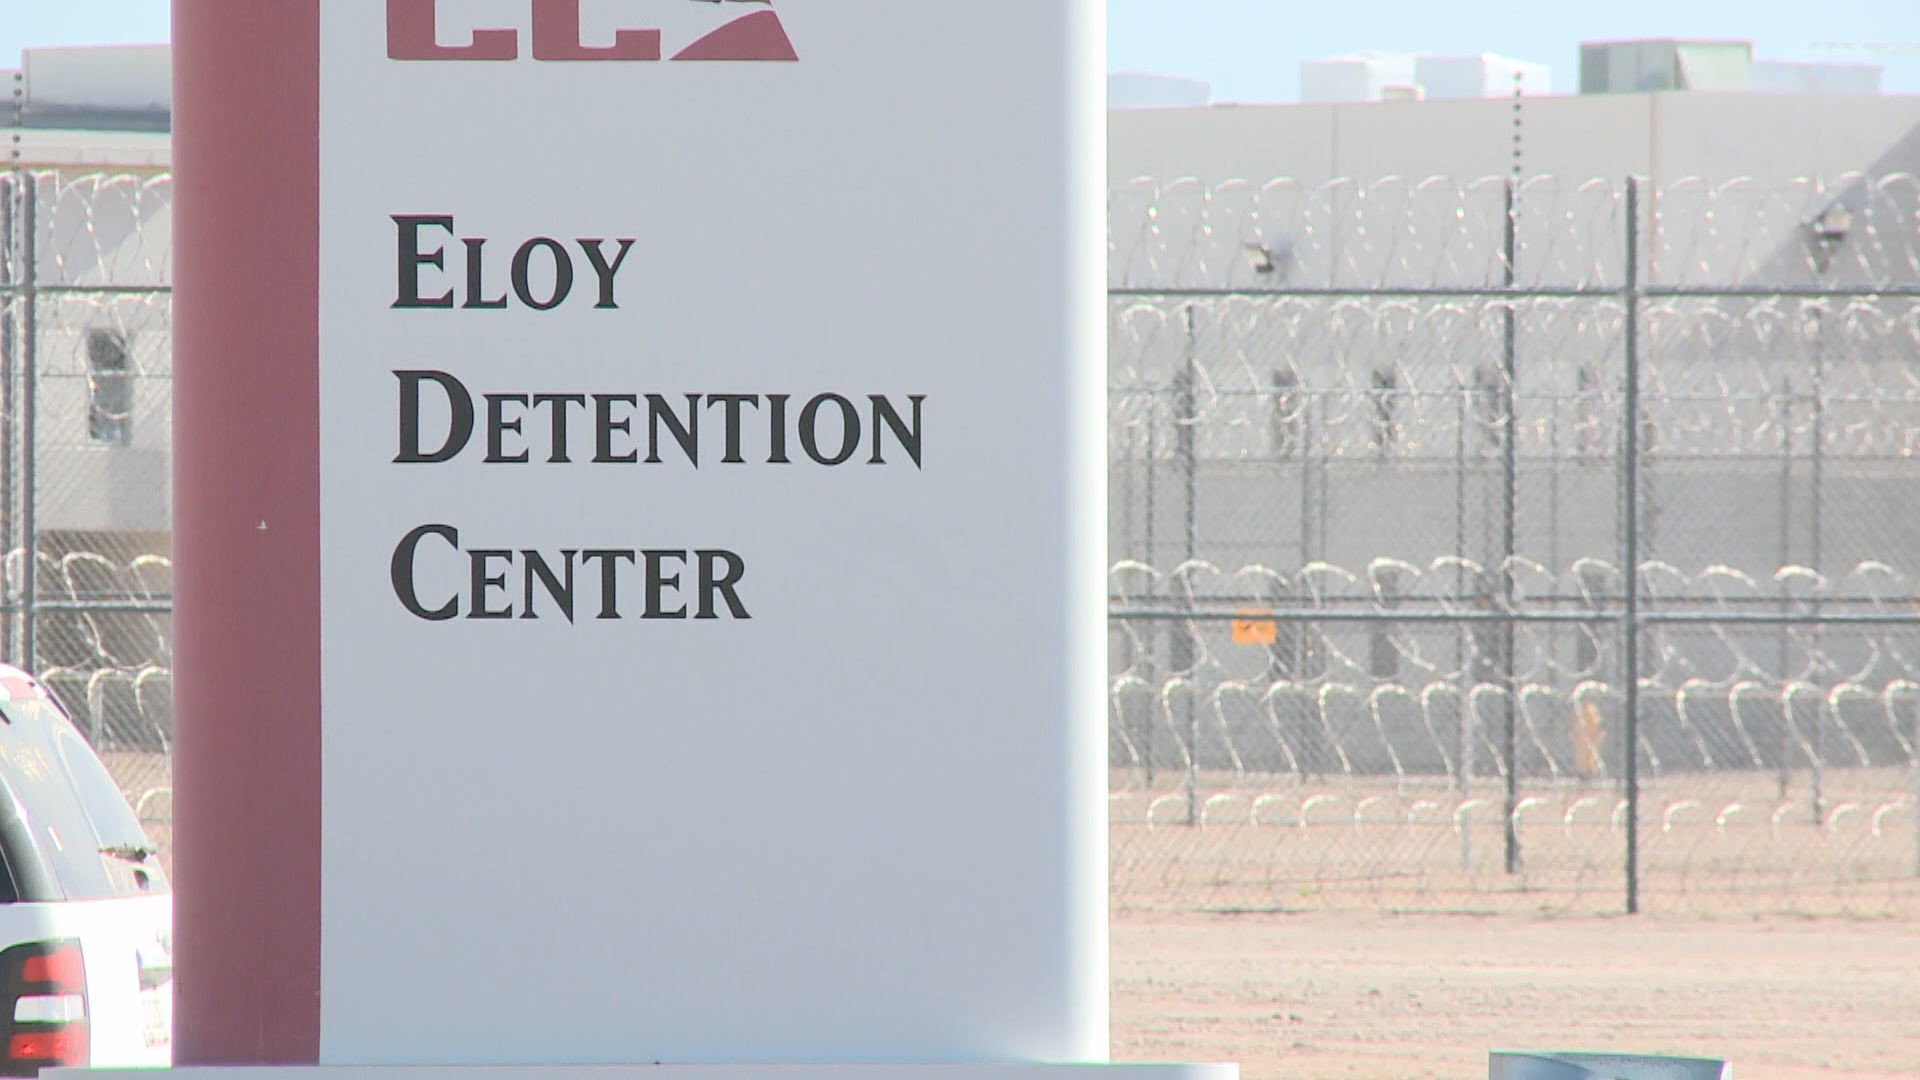 Across the country, immigration detention centers have quarantined more than 2200 migrants who may have been exposed to the mumps virus. More than 300 of those have been isolated at the detention center in Eloy, AZ.